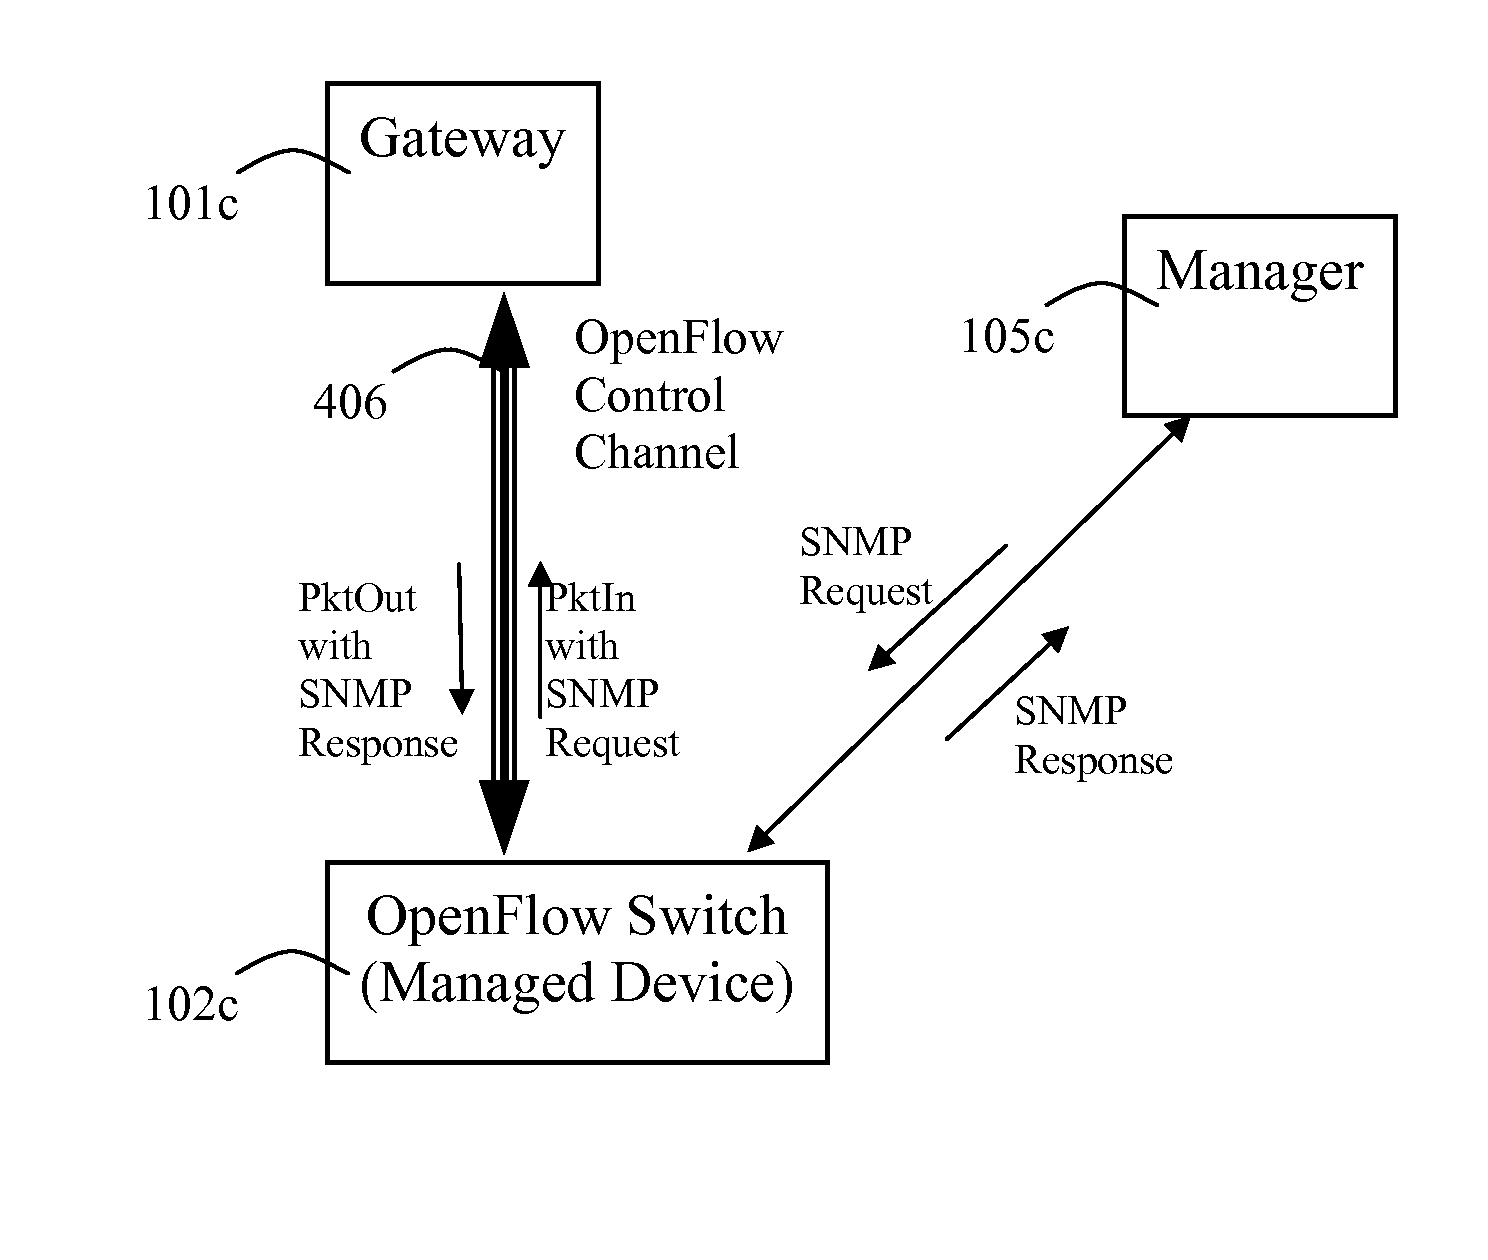 Monitoring gateway systems and methods for openflow type networks